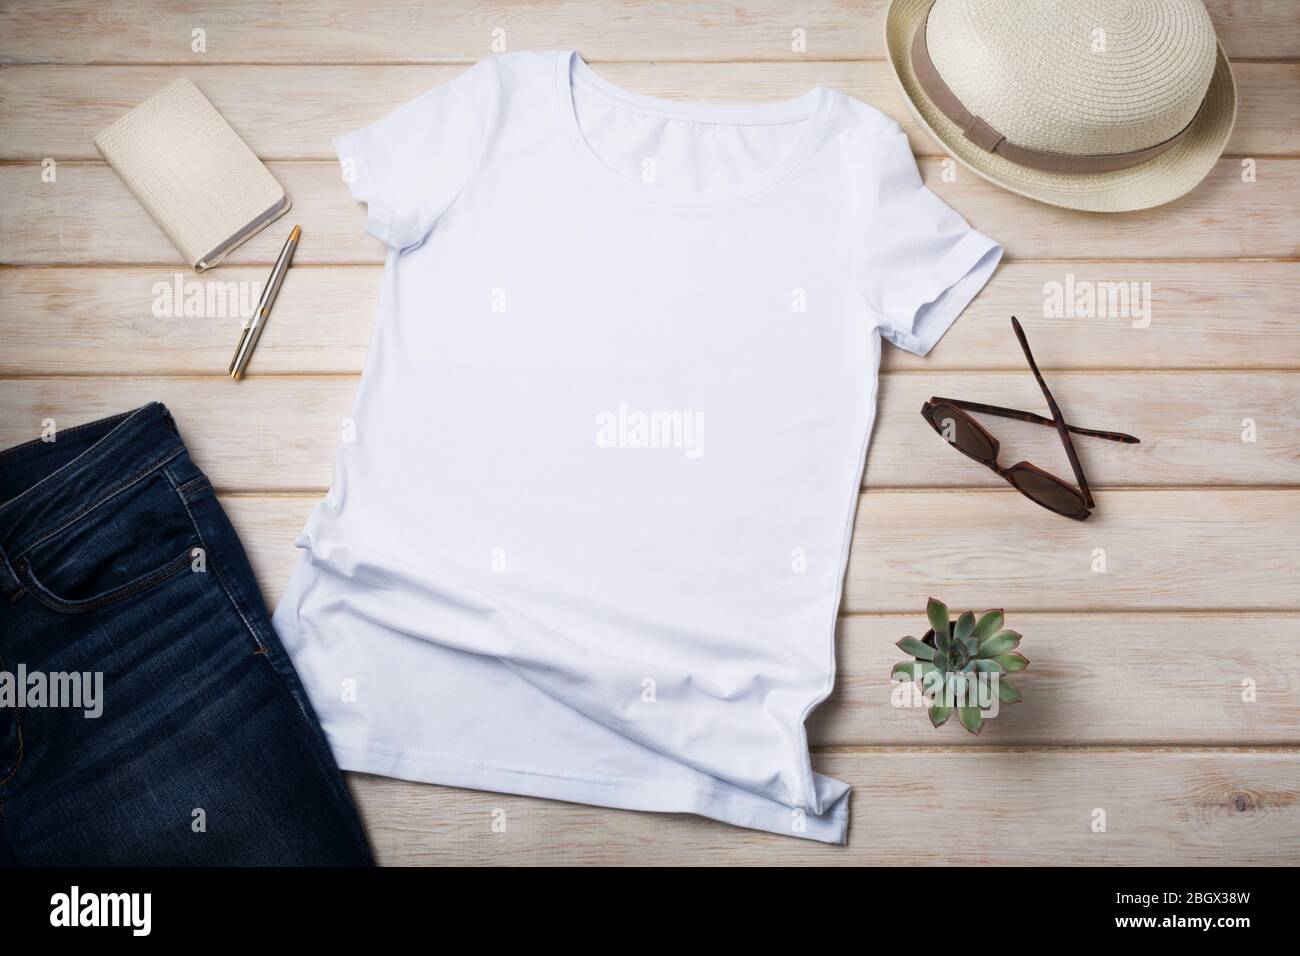 White women’s cotton T-shirt mockup with summer hat, succulent plant and sunglasses. Design t shirt template, tee print presentation mock up Stock Photo